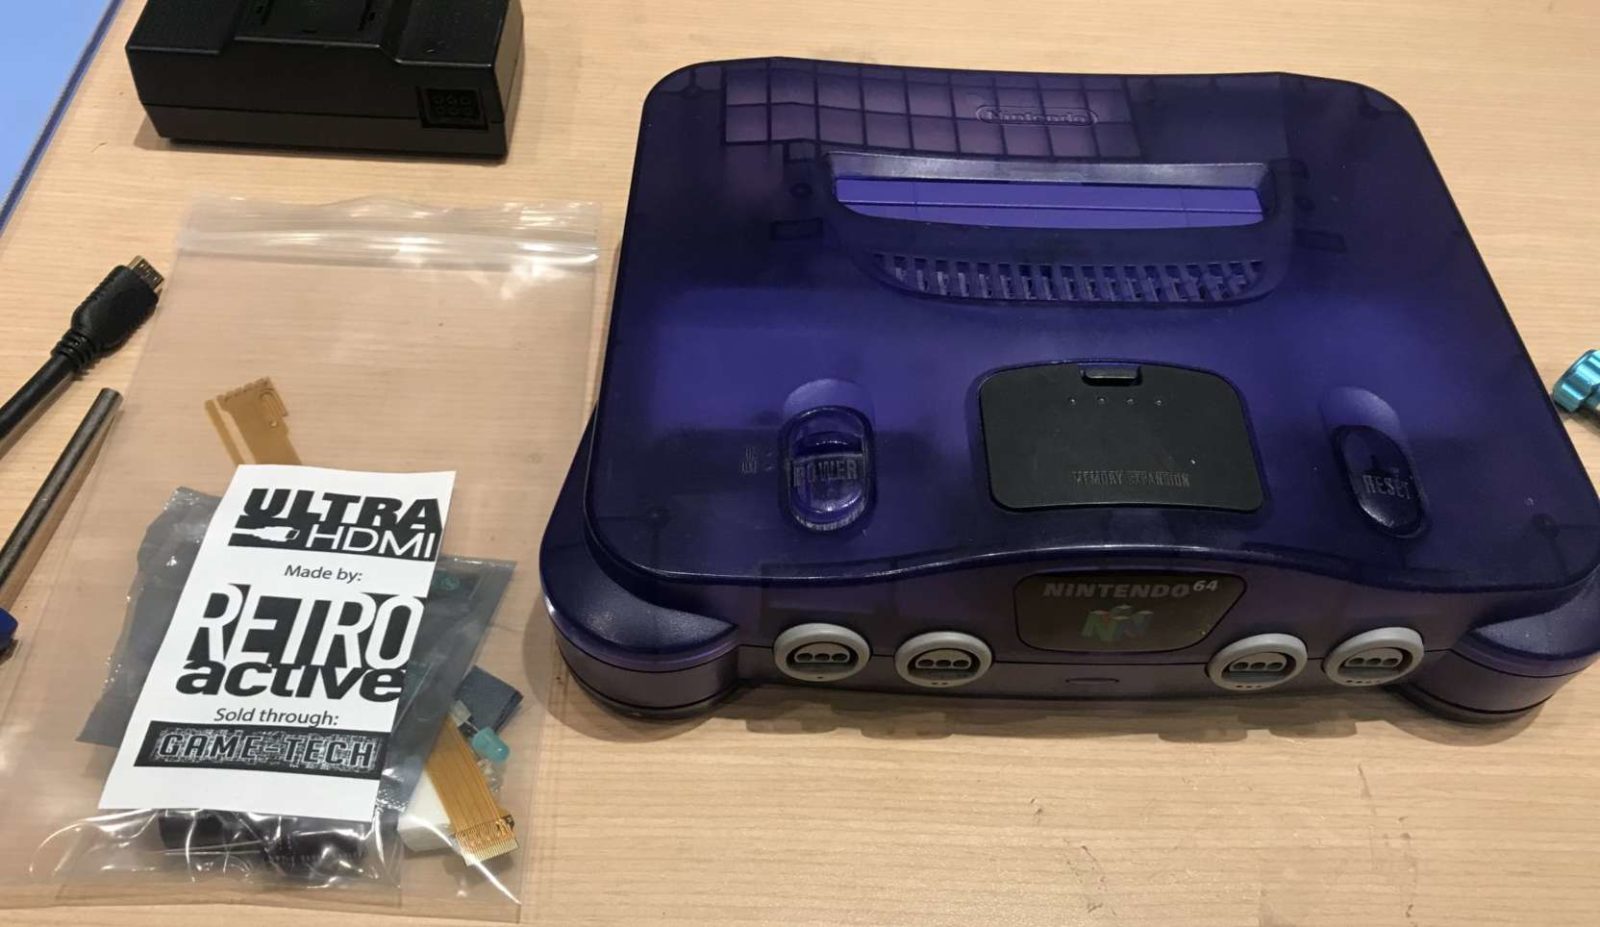 n64 with hdmi